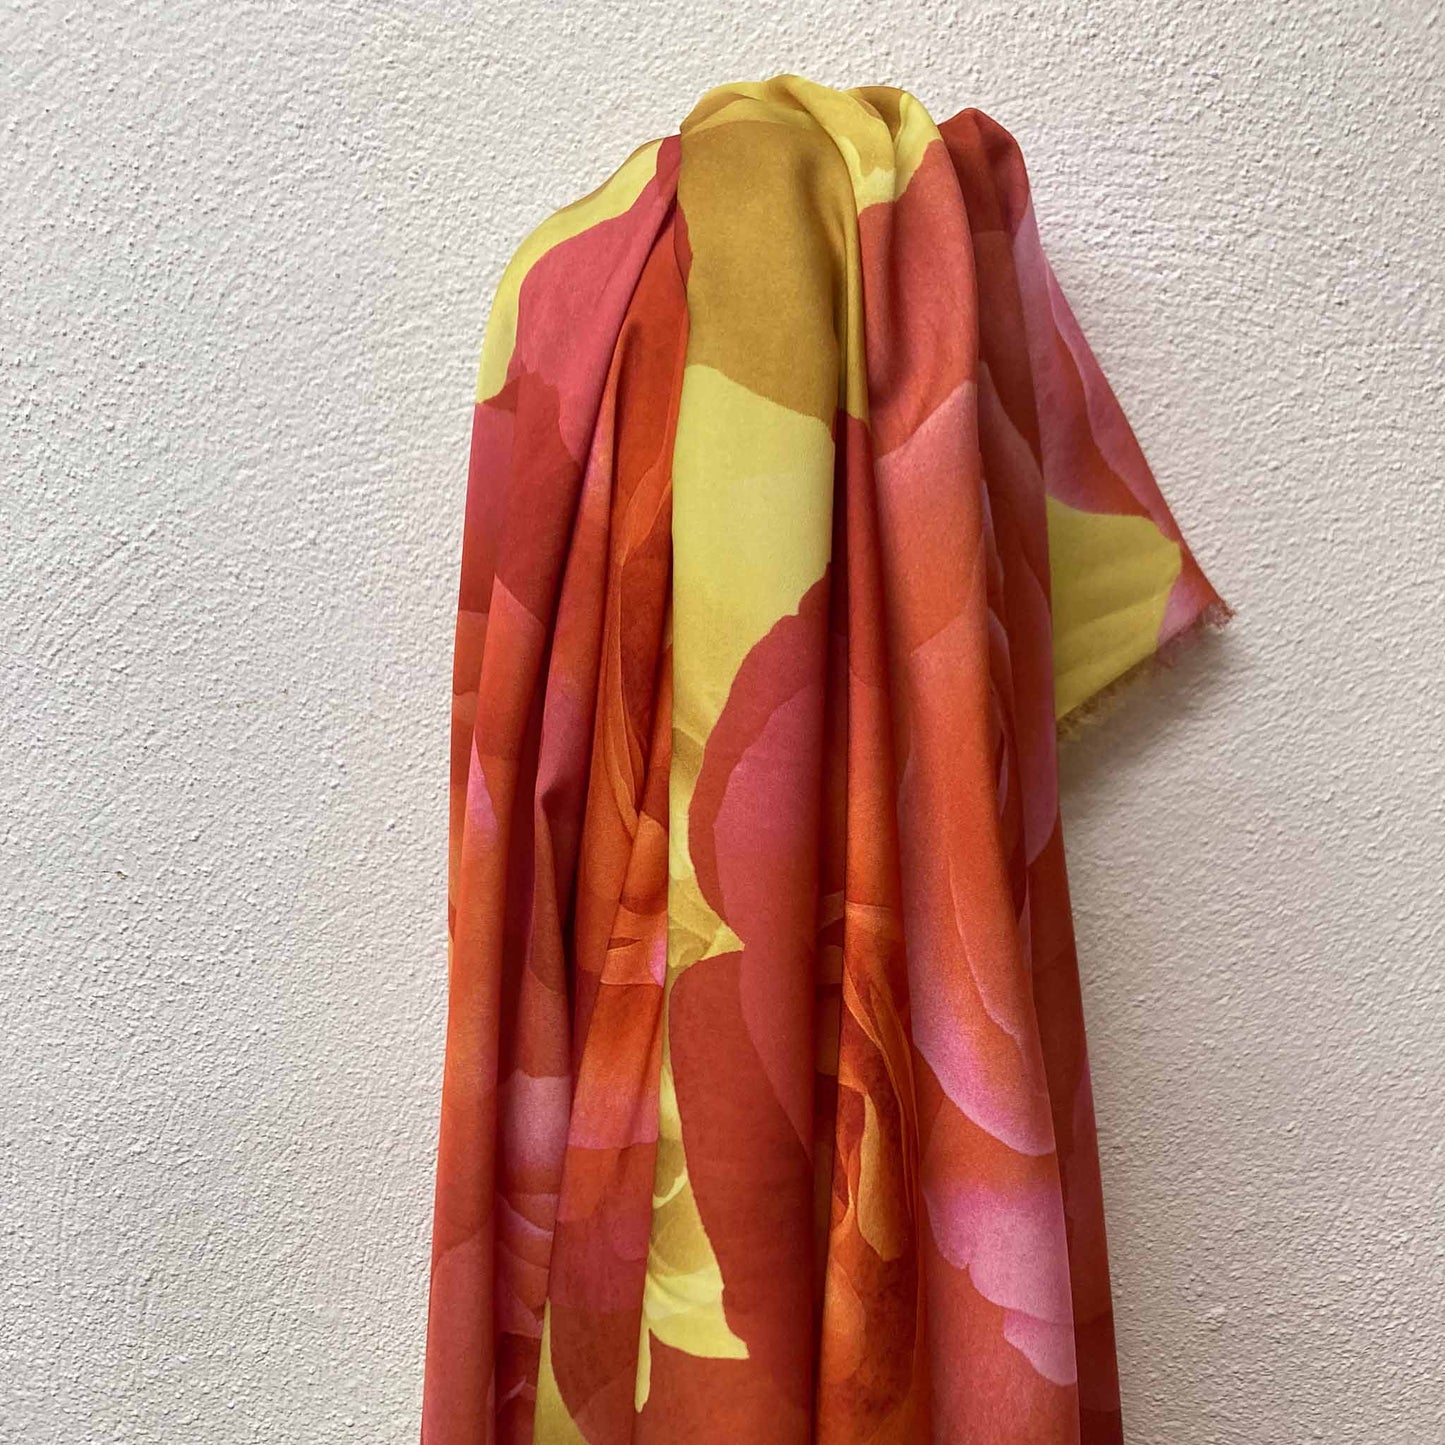 B-stock - Soft Satin Fabric - Red and yellow *